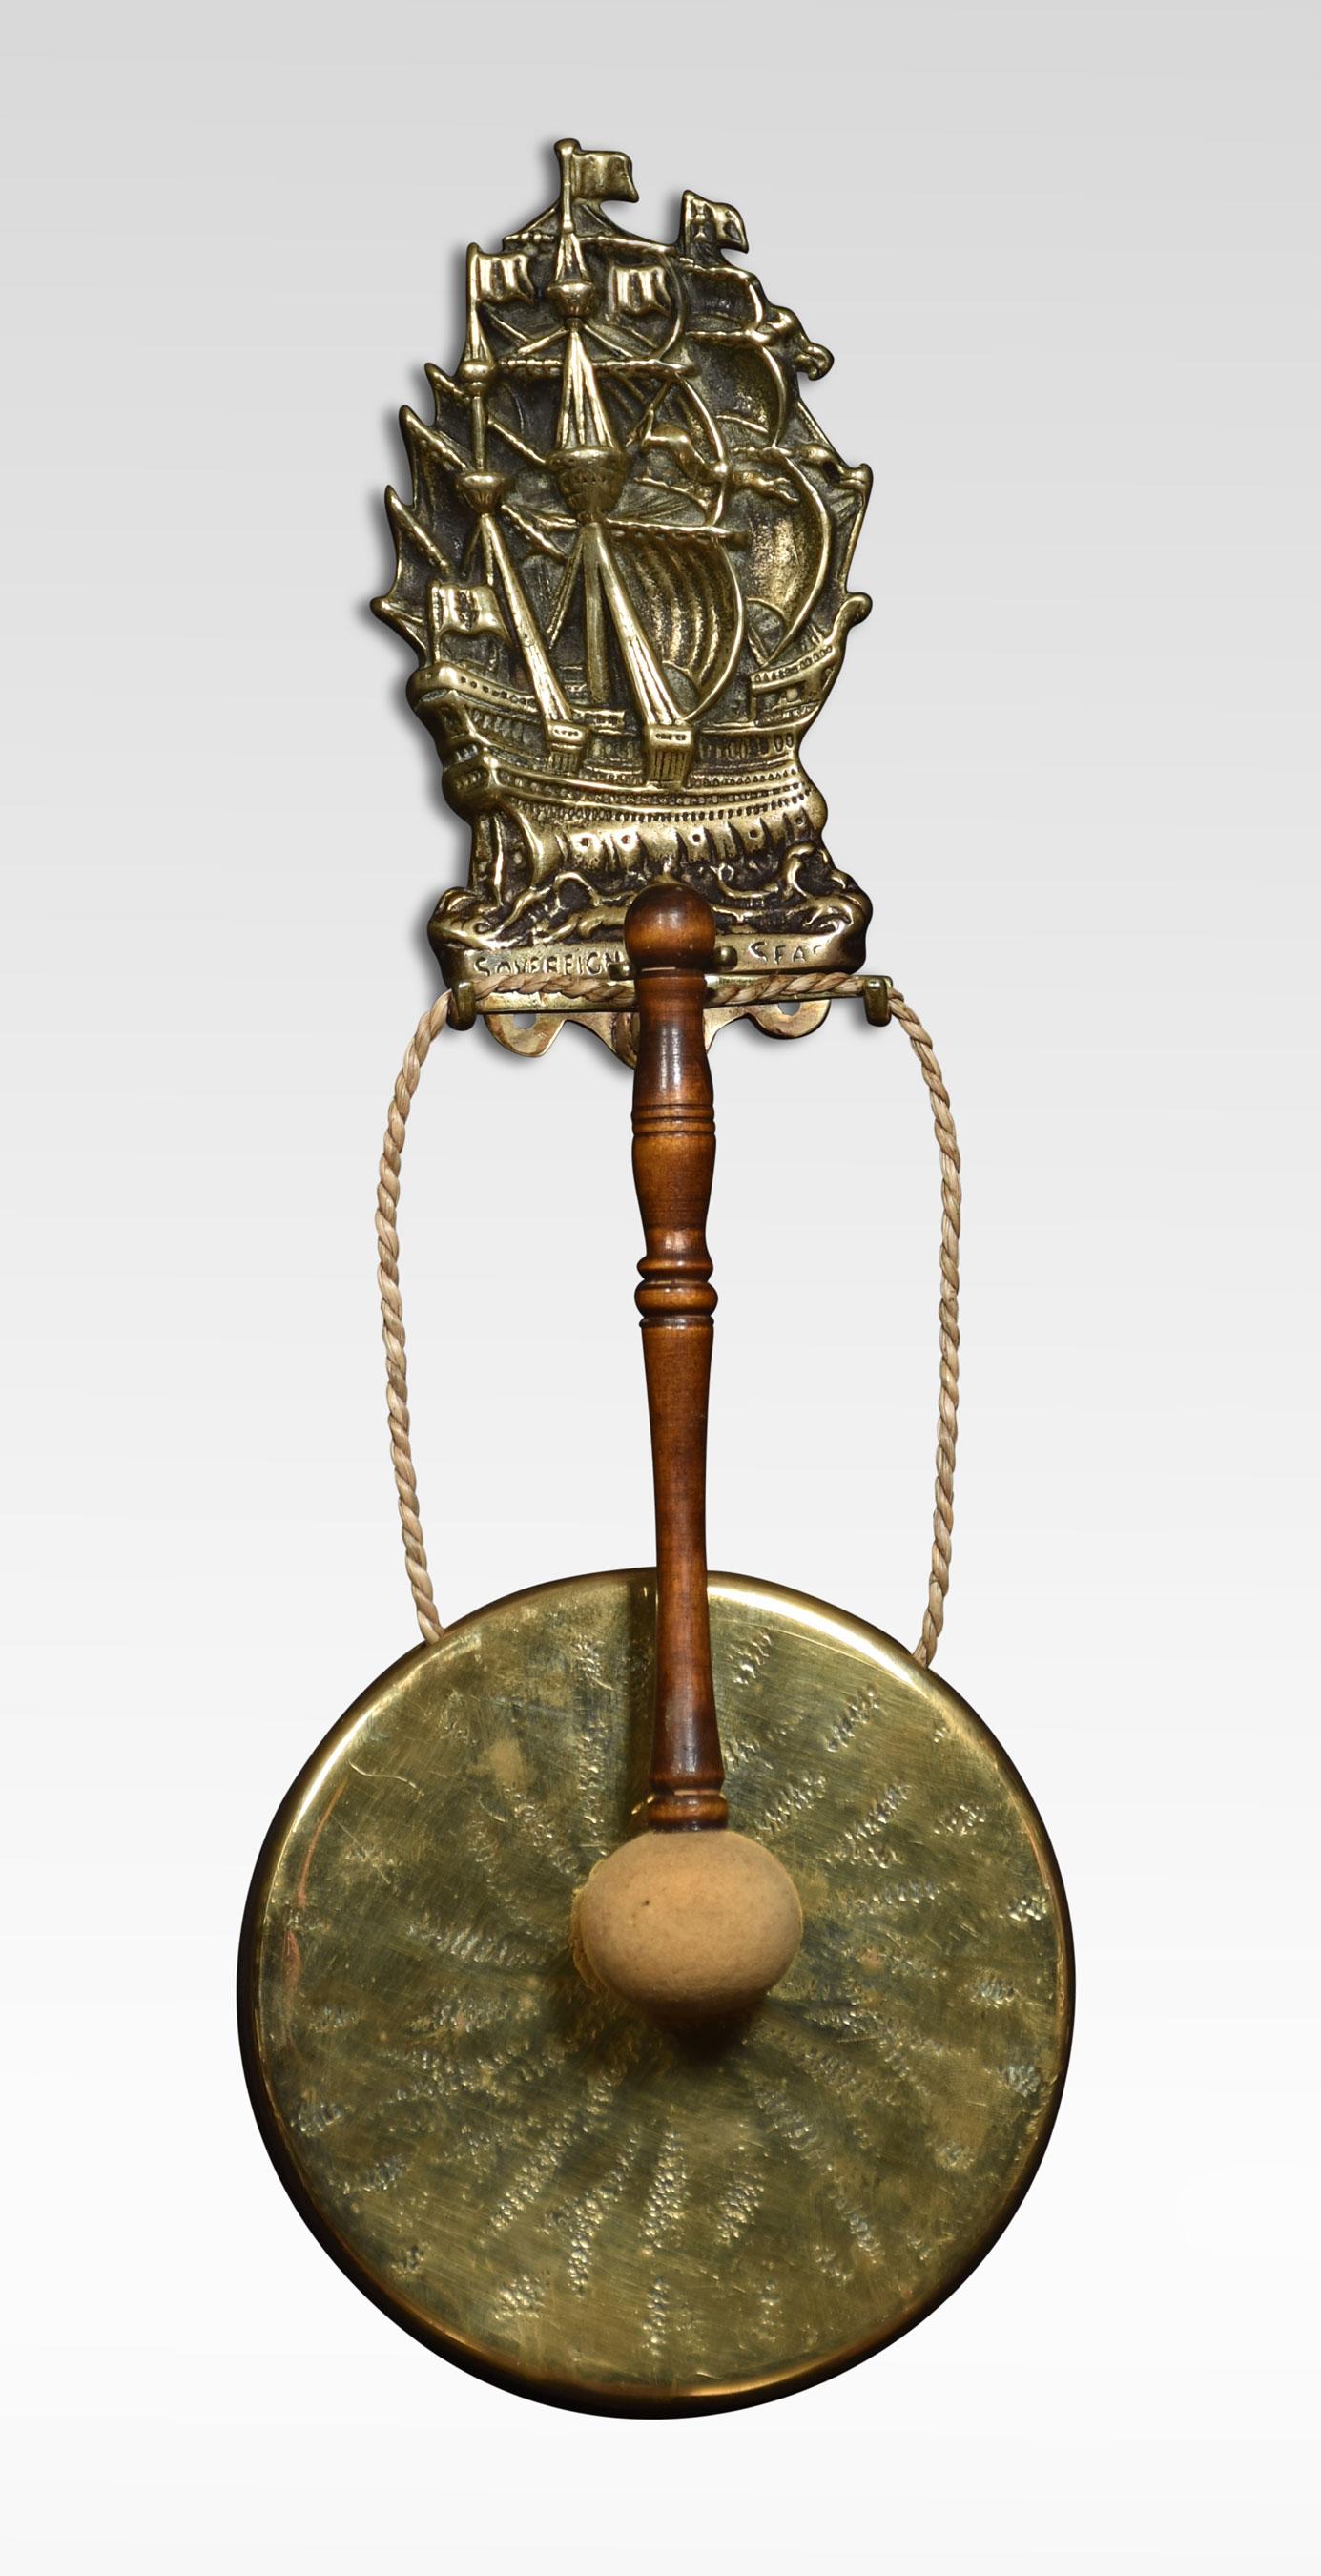 Wall hanging dinner gong, the brass backplate depicting the Sovereign of the Seas, a clipper ship built in 1852. Above scrolling hooks supporting the circular gong. Together with original hammer.

Dimensions
Height 18 Inches
Width 6